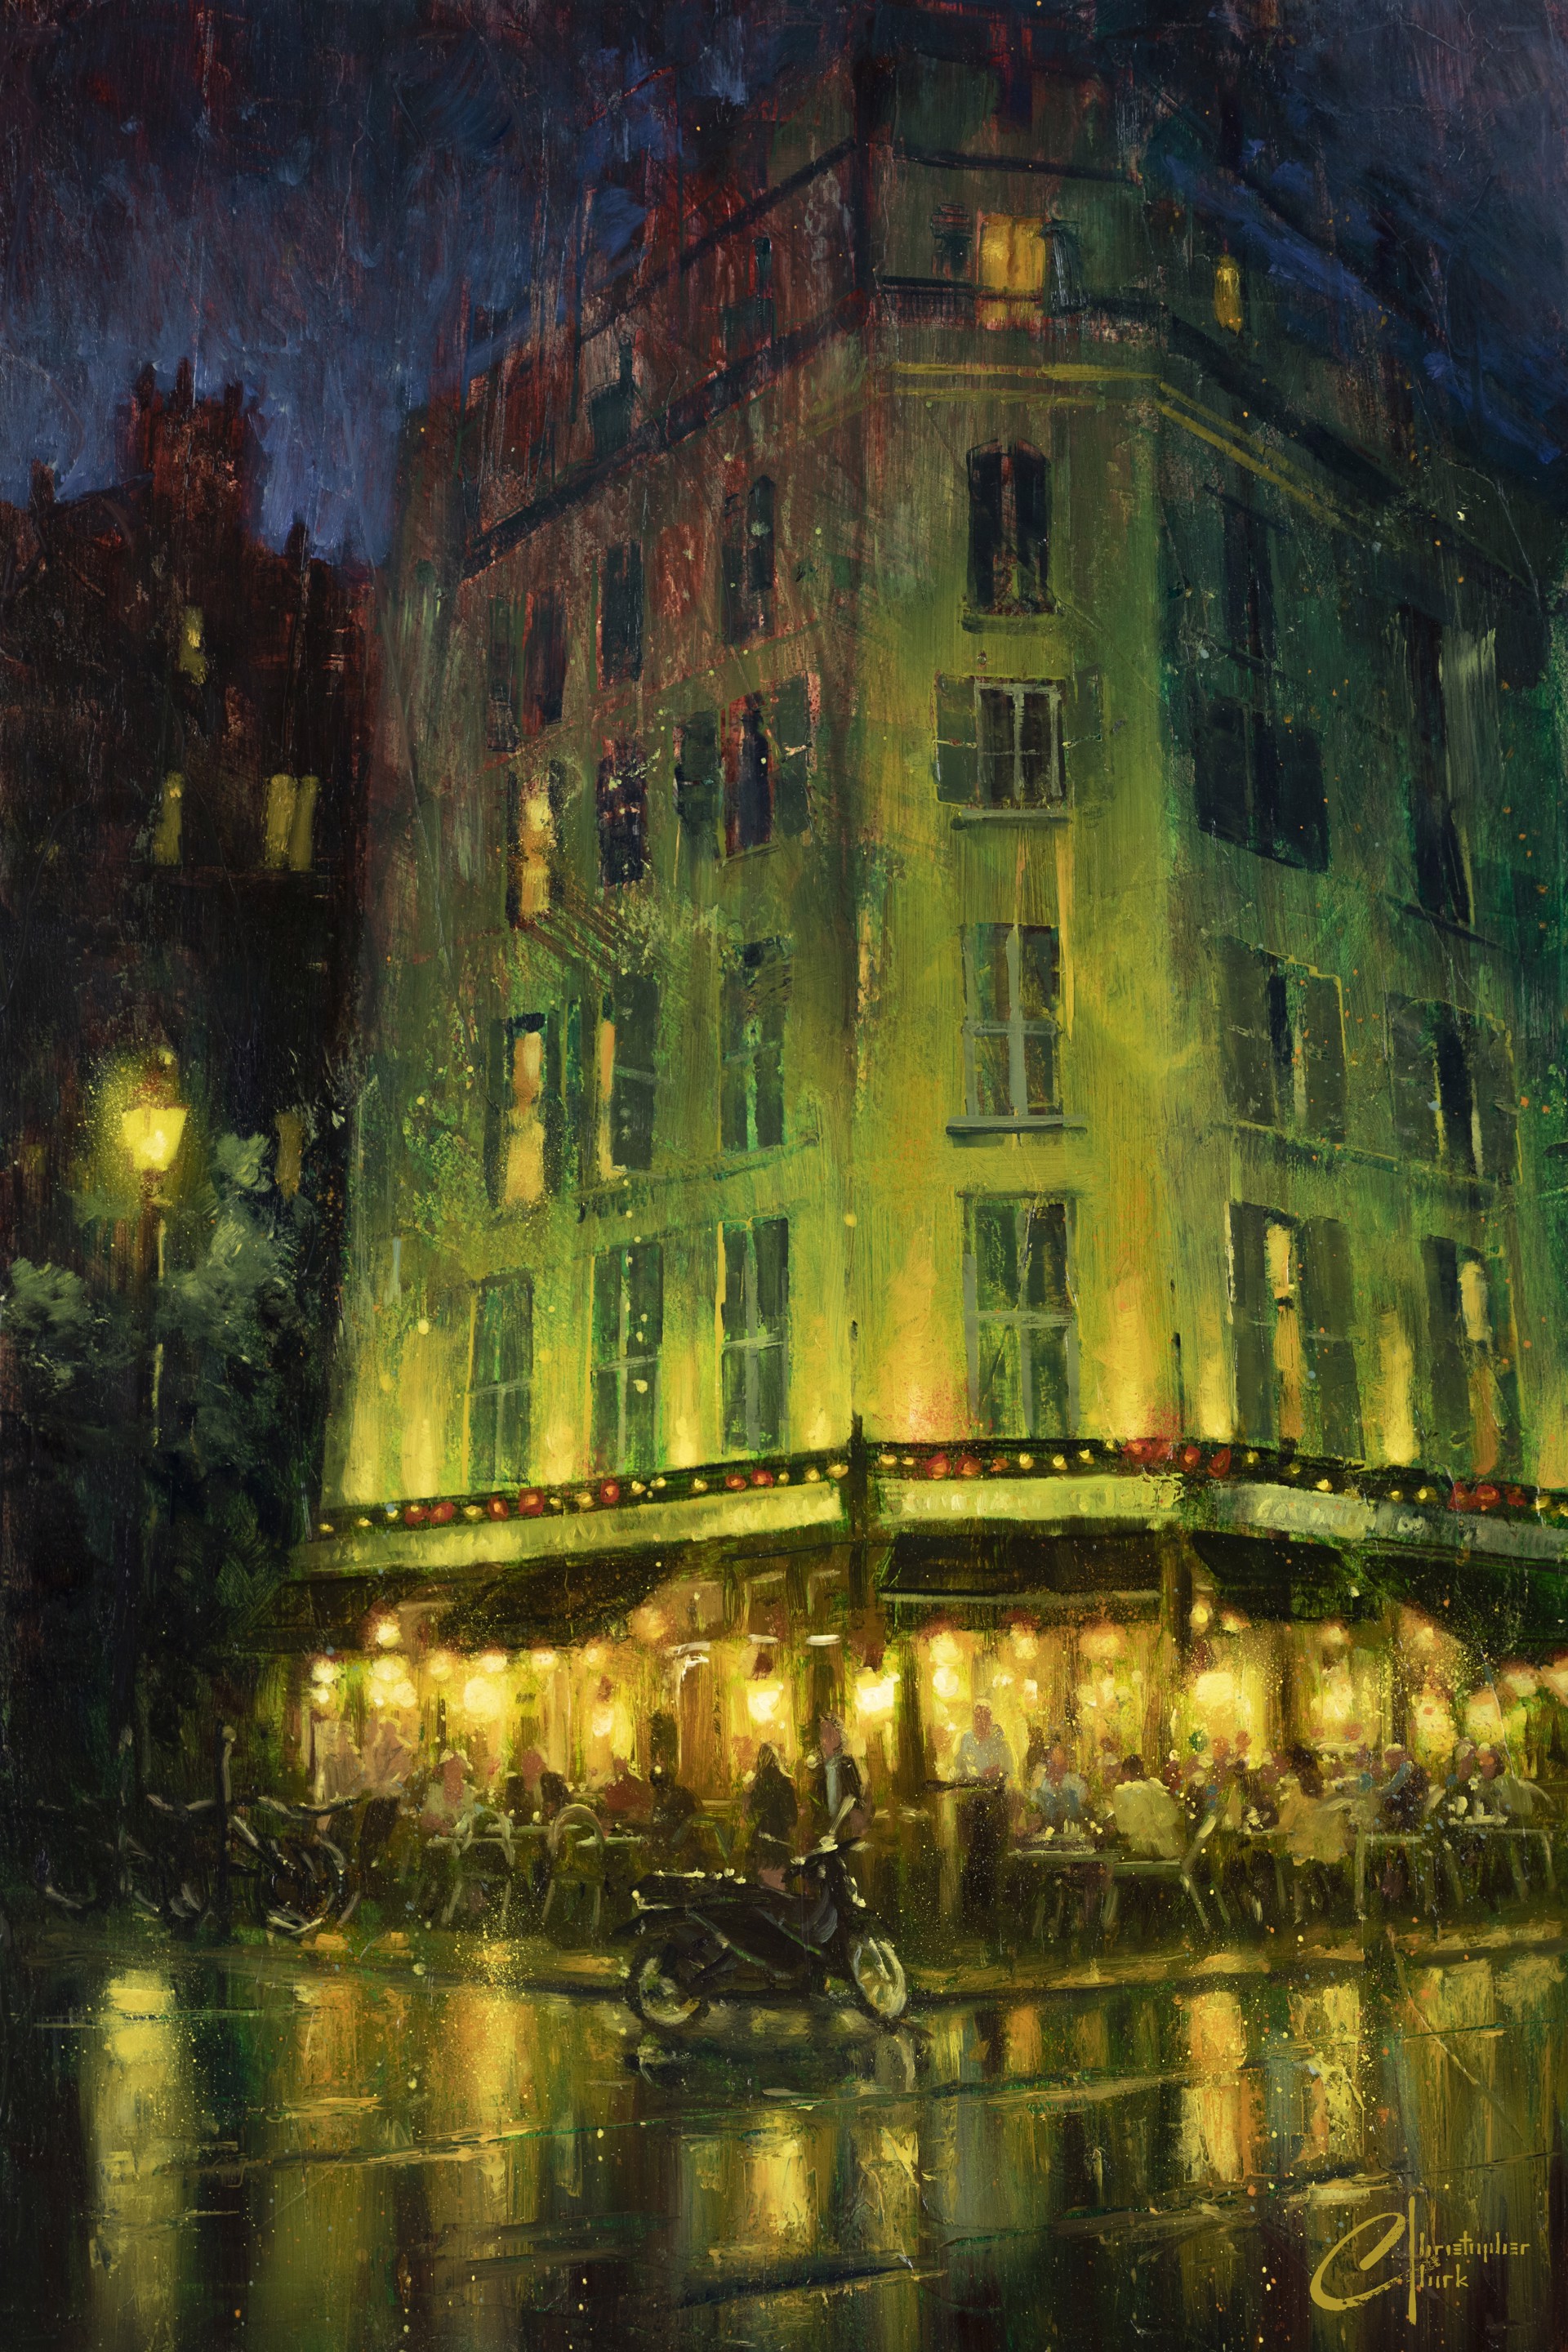 Paris, Cafe Atmosphere by Christopher Clark